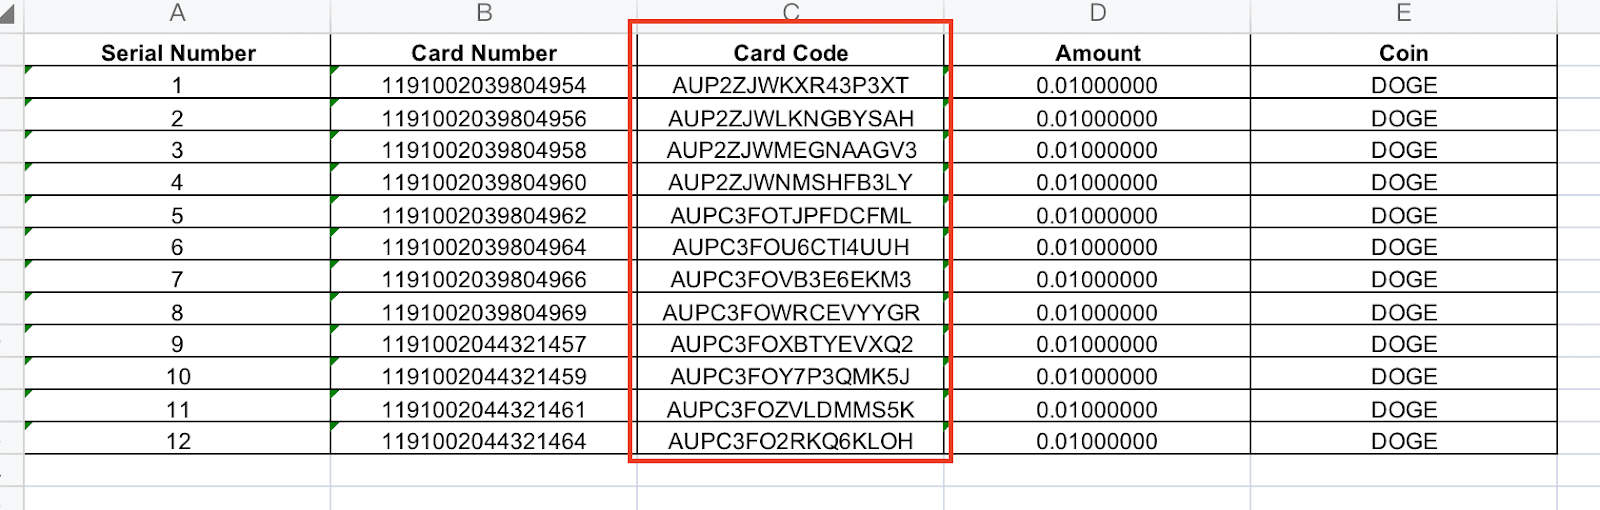 How to Obtain Binance Gift Card Codes?